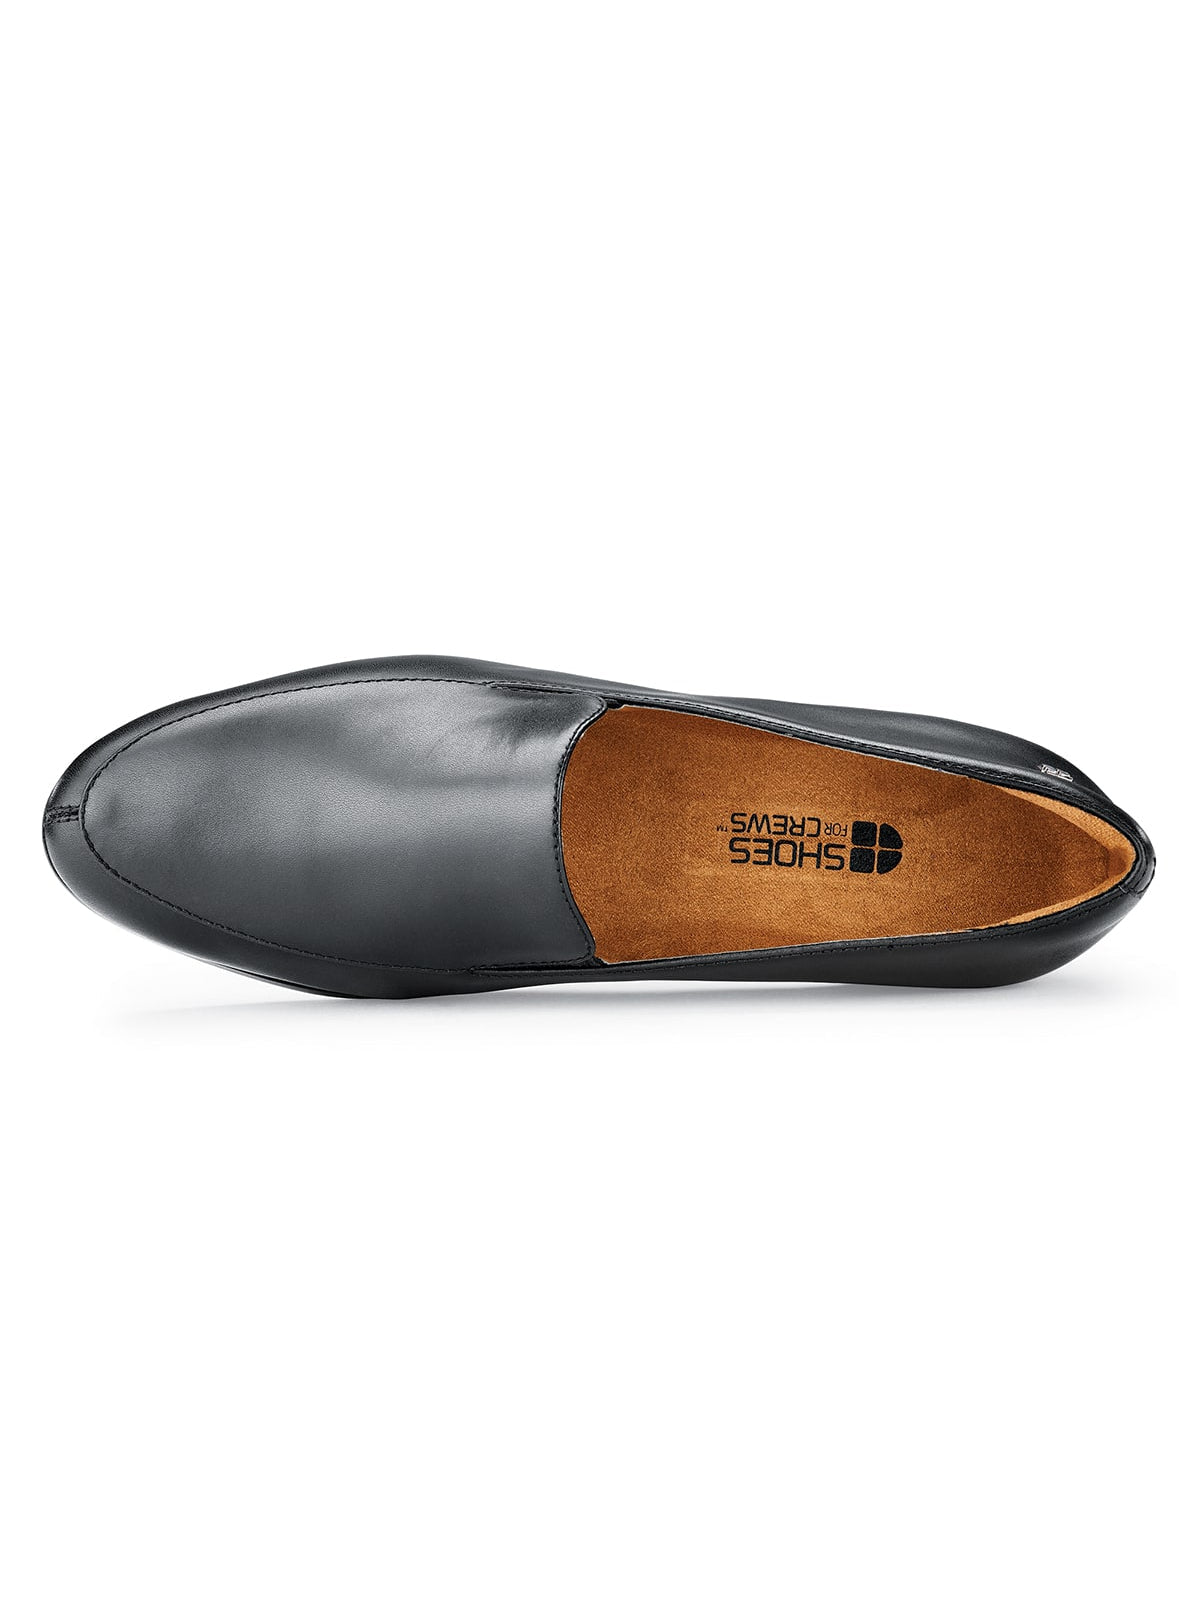 Women's Work Shoe Envy III by Shoes For Crews -  ChefsCotton